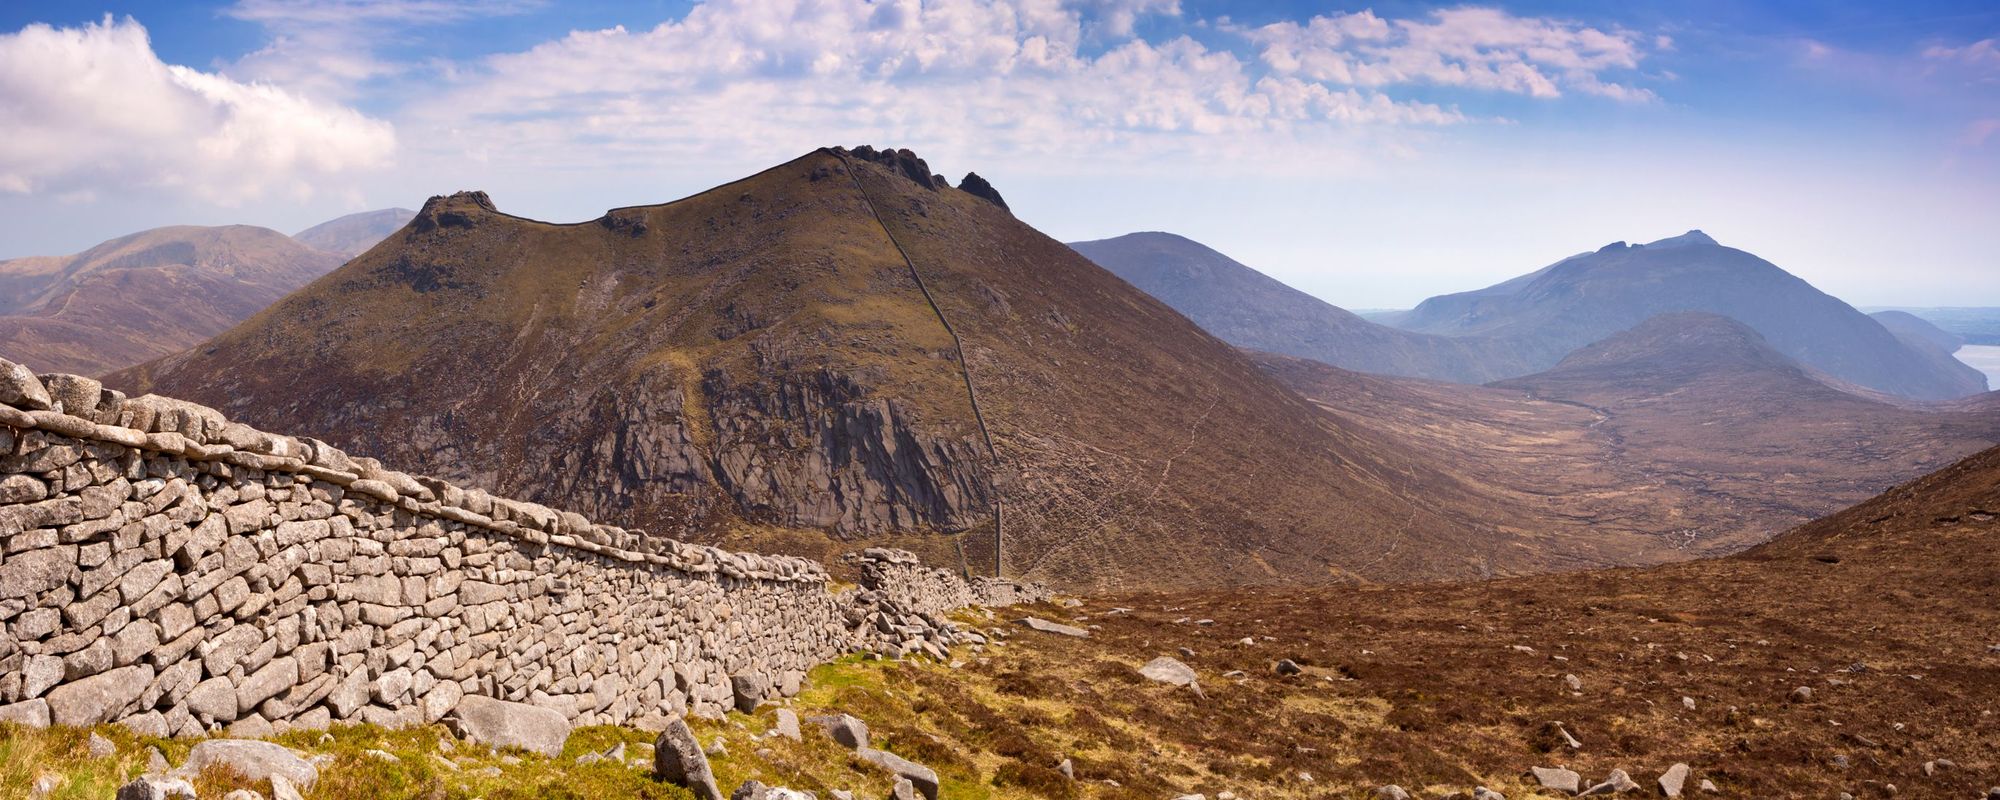 The Mourne Wall, which stretches up the major peaks in the Mourne Mountains, Northern Ireland.